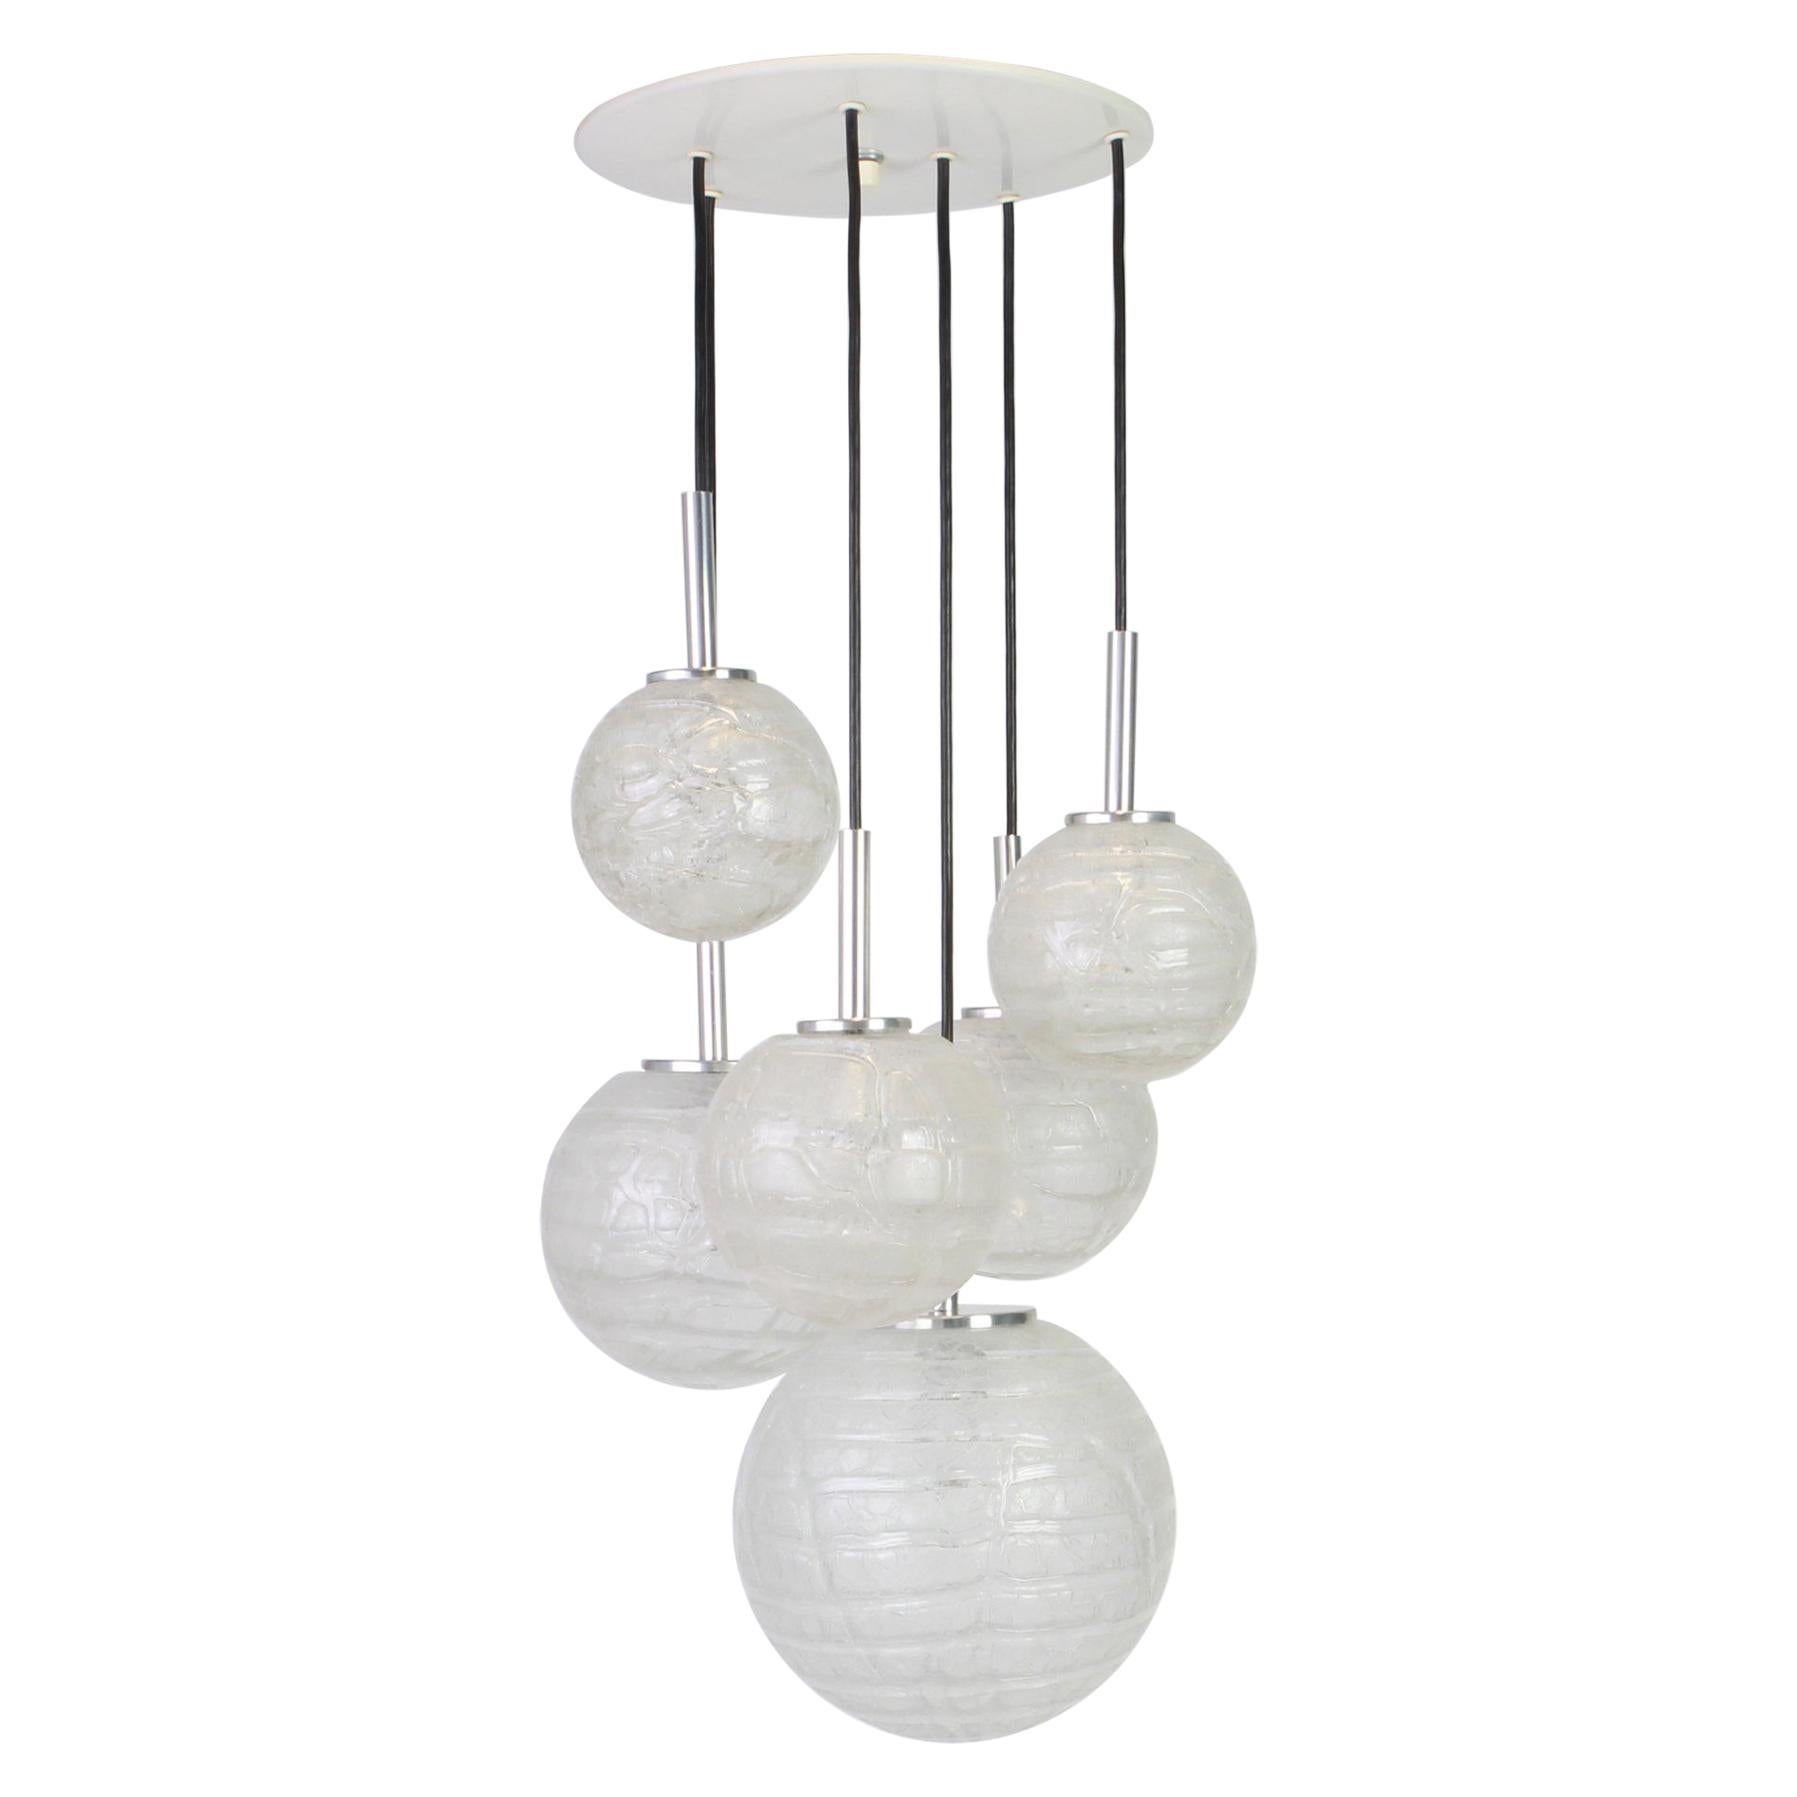 Large Designer Cascading Chandelier Murano Glass by Doria, Germany, 1970s For Sale